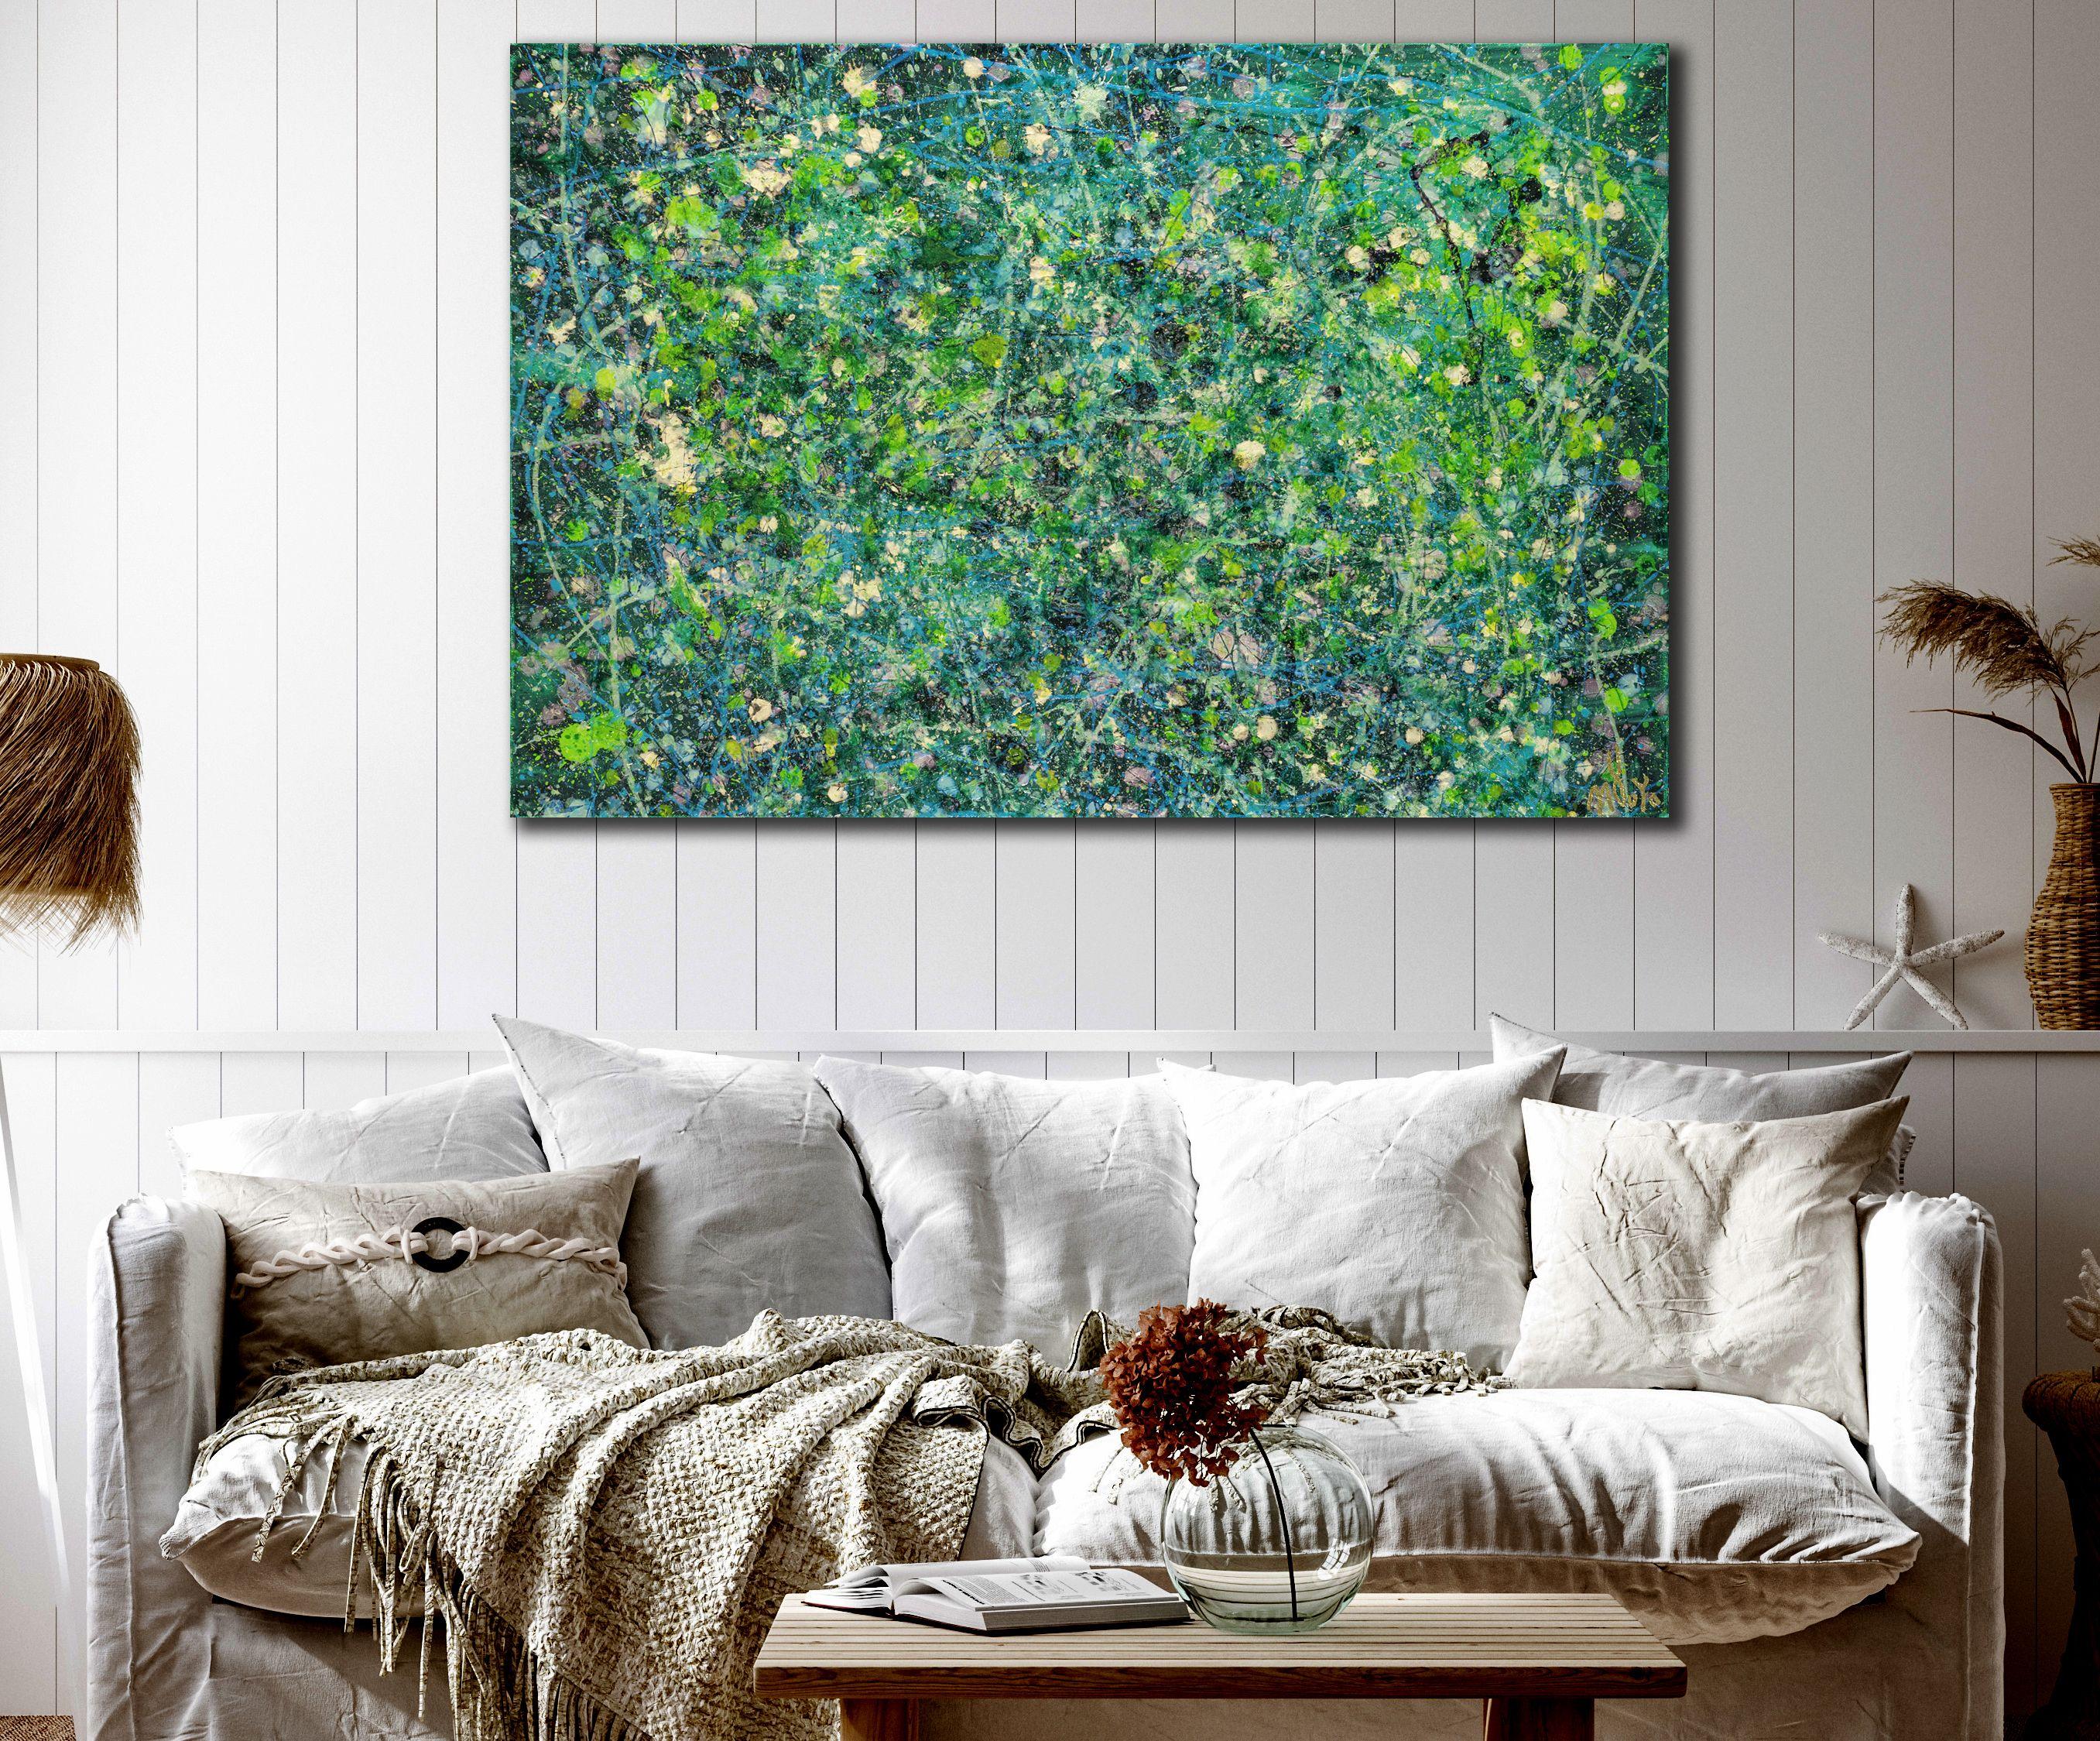 Tangled up in green 2, Painting, Acrylic on Canvas - Gray Abstract Painting by Nestor Toro